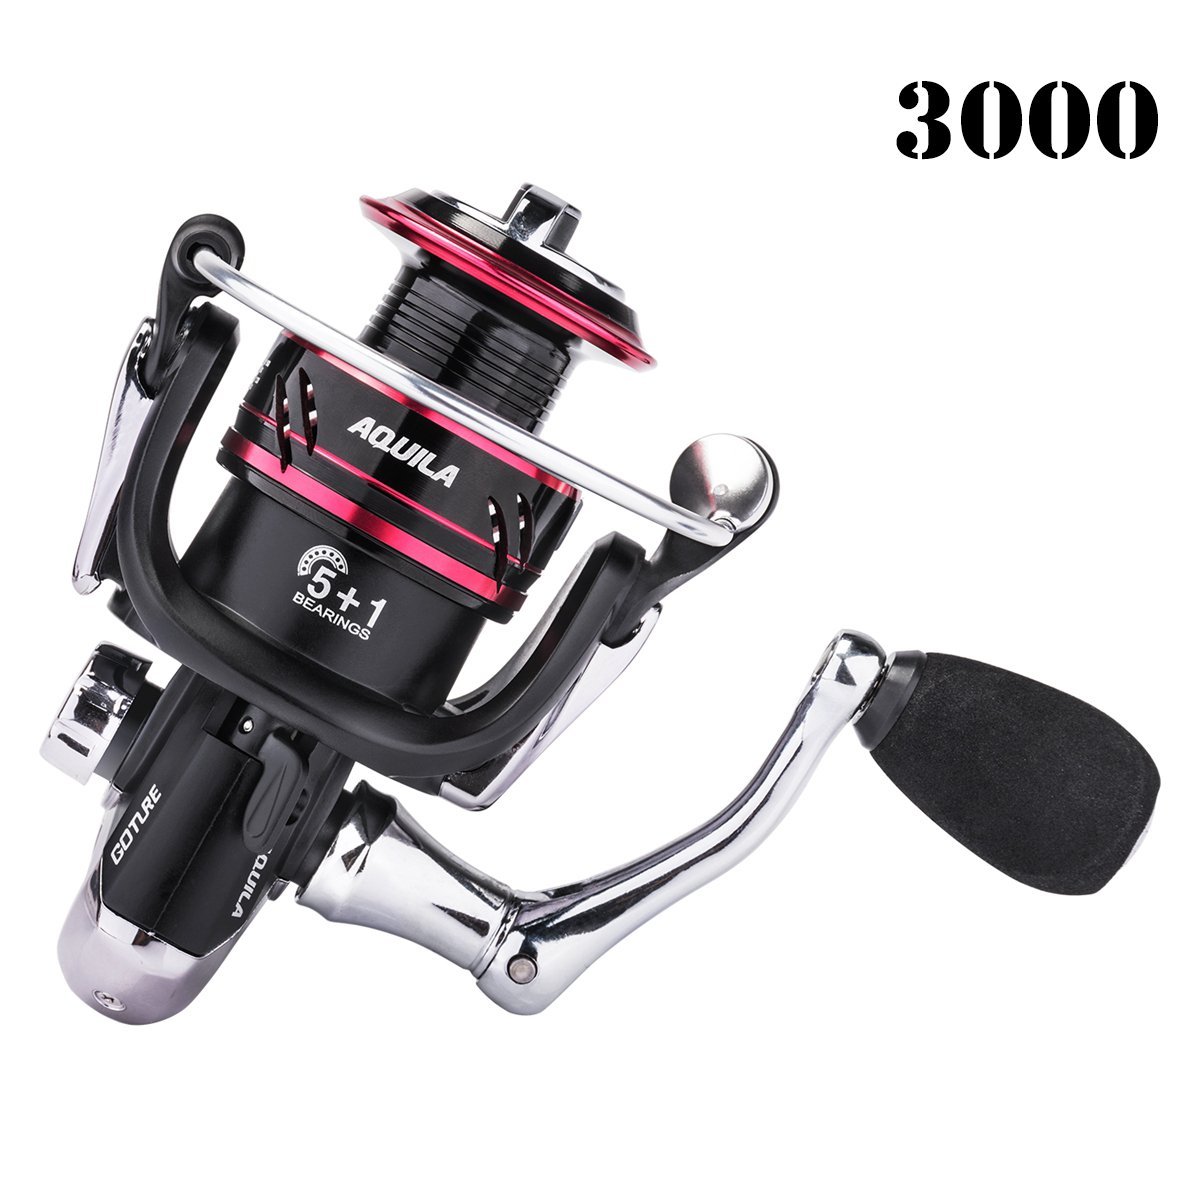 Goture Power Knob Handle Knob Compatible for Shimano Spinning Reel